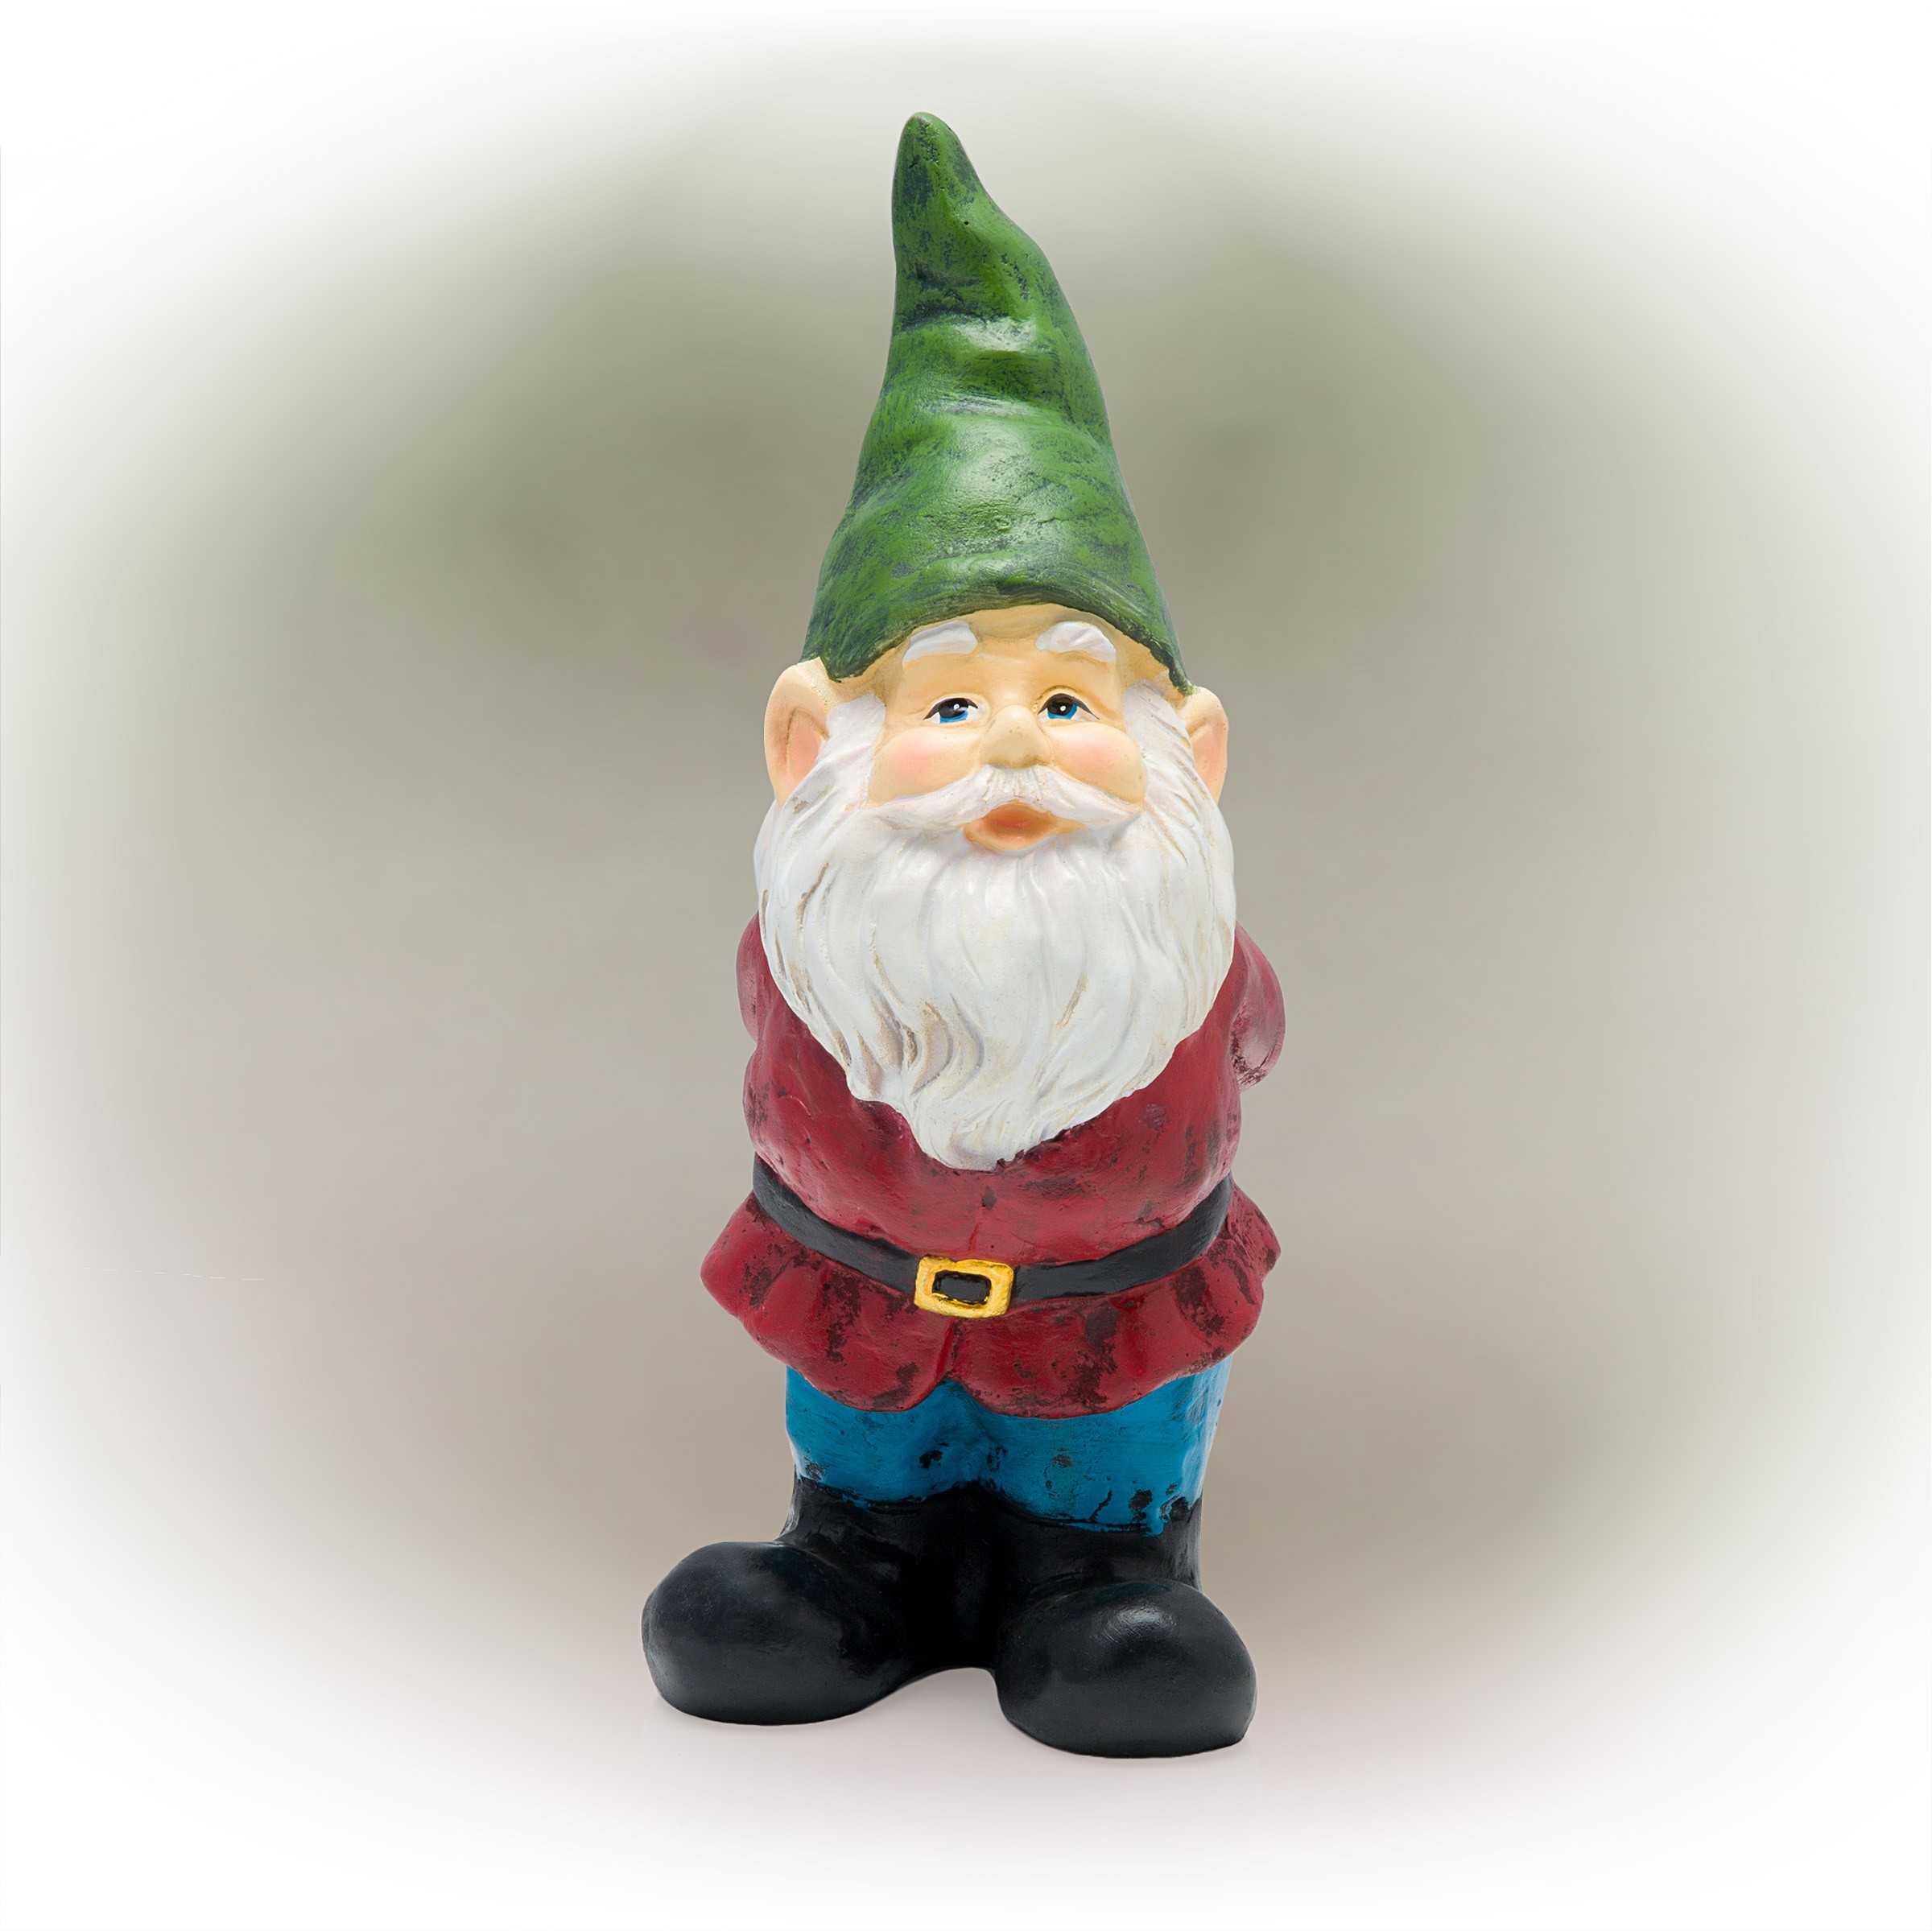 Bearded Garden Gnome Statue with Green Hat